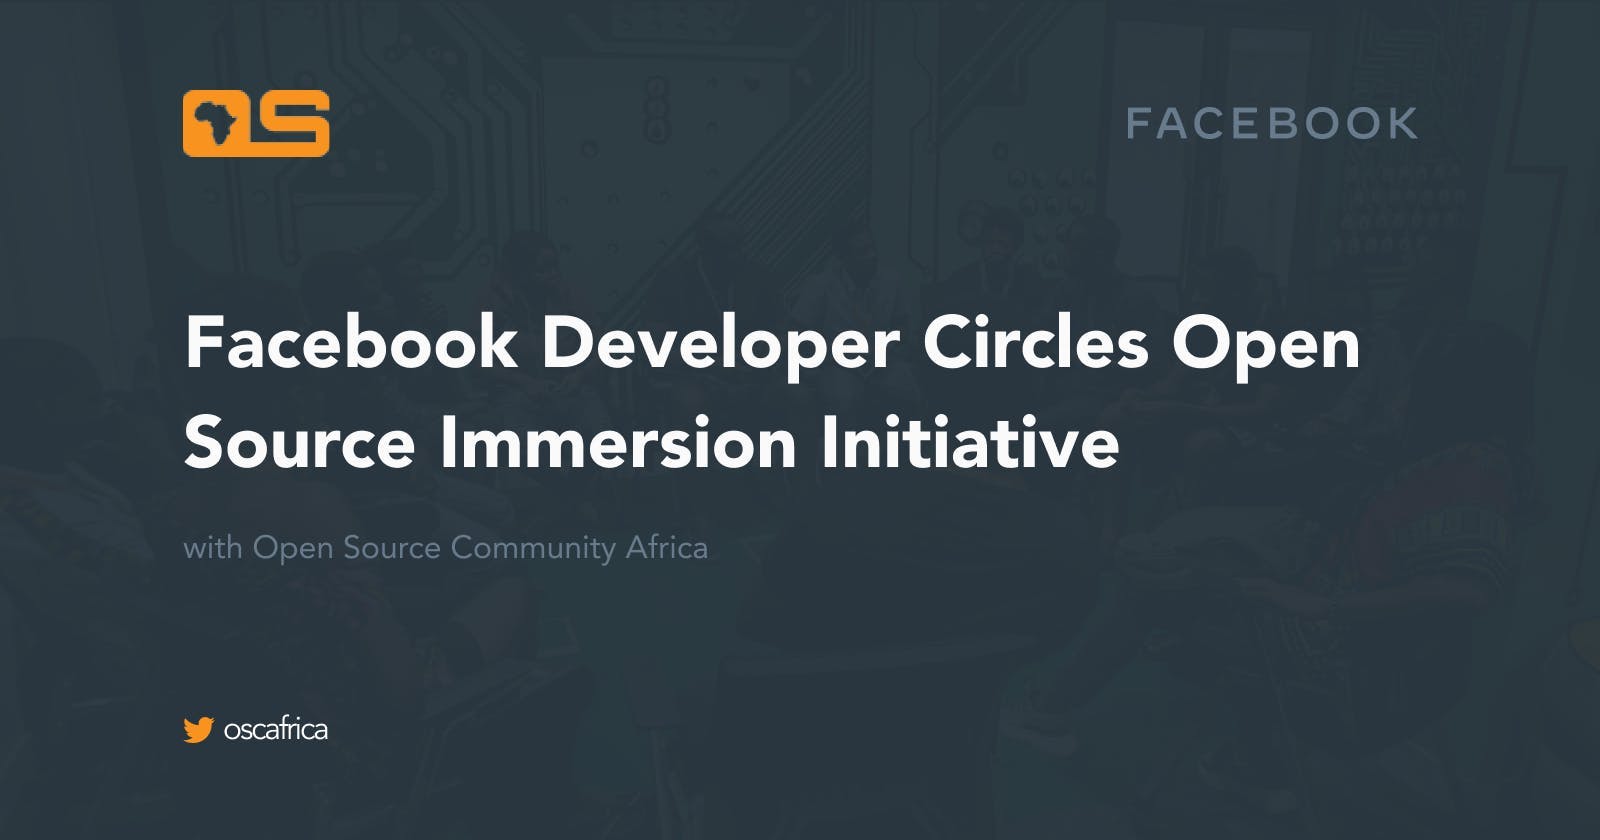 Open Source Immersion Program from Facebook 🤝 OSCA